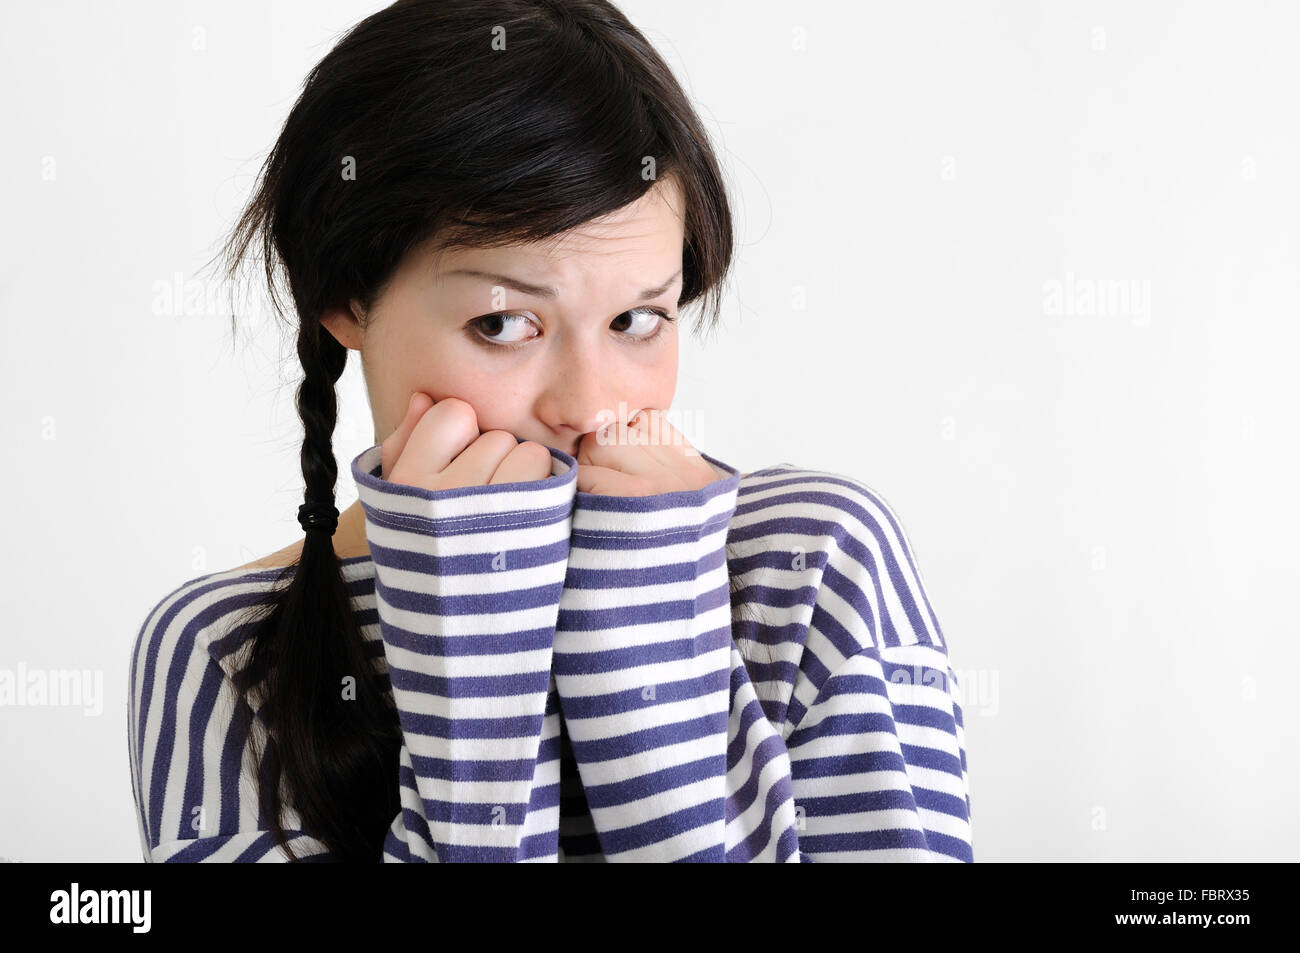 portrait of worried young woman Stock Photo